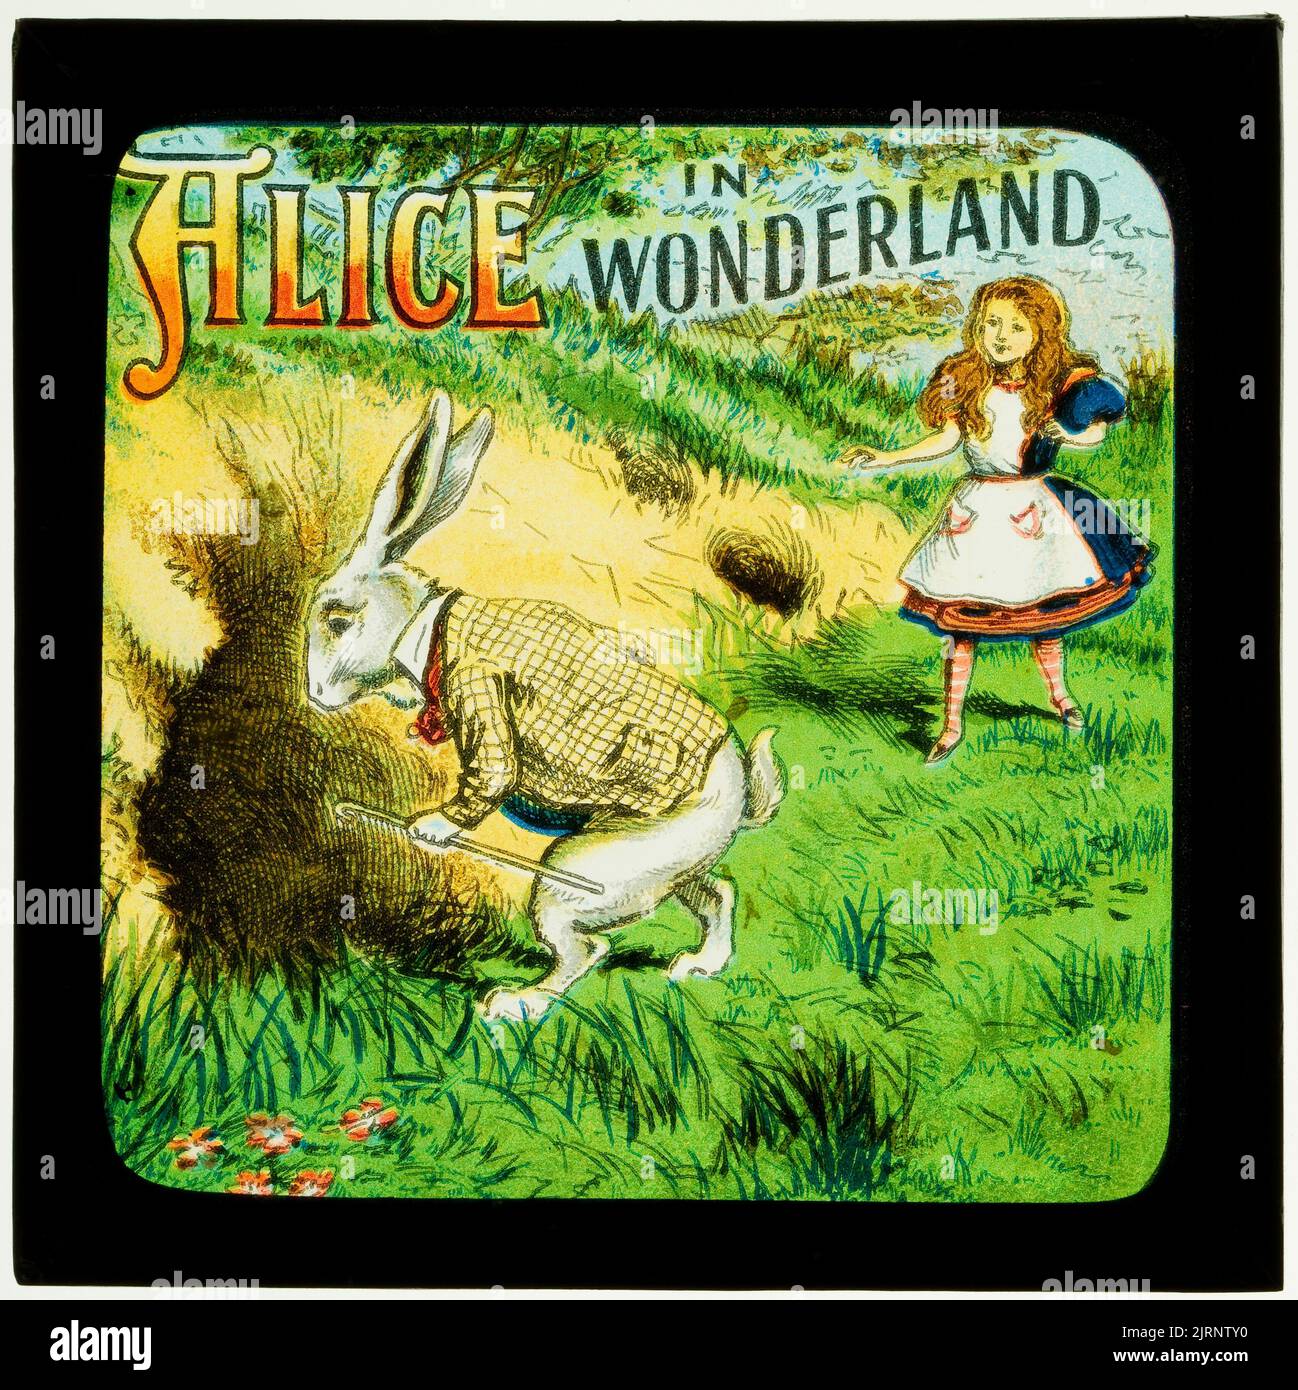 Alice in Wonderland (Part 1), Down the rabbit hole: suddenly a white rabbit, with pink eyes, ran close by her, circa 1900, London, by W. Butcher & Sons, Sir John Tenniel. Stock Photo